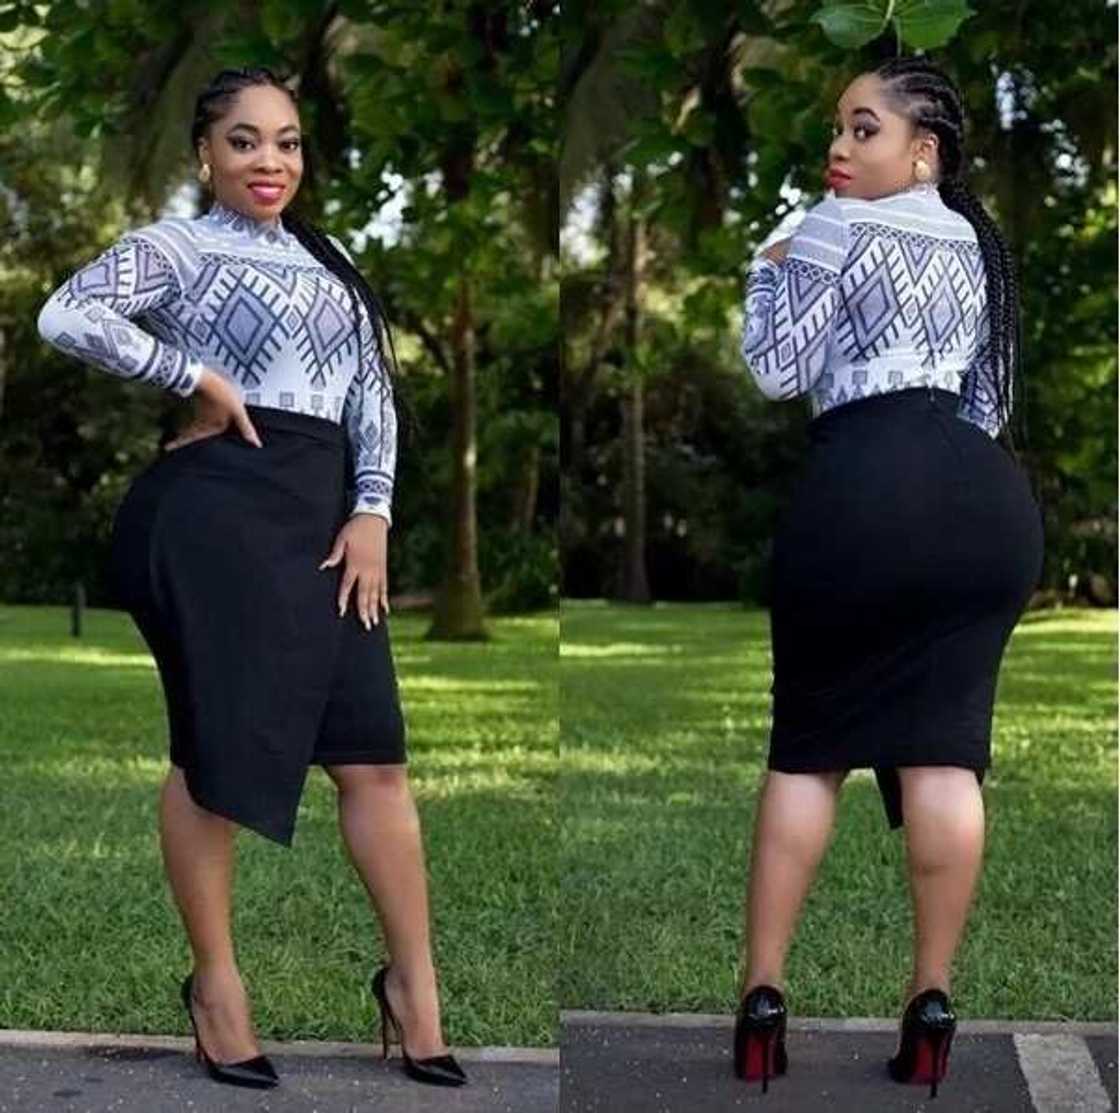 Kevin Taylor Challenges Moesha to Correct her body; Return car and House to Prove her Repentance